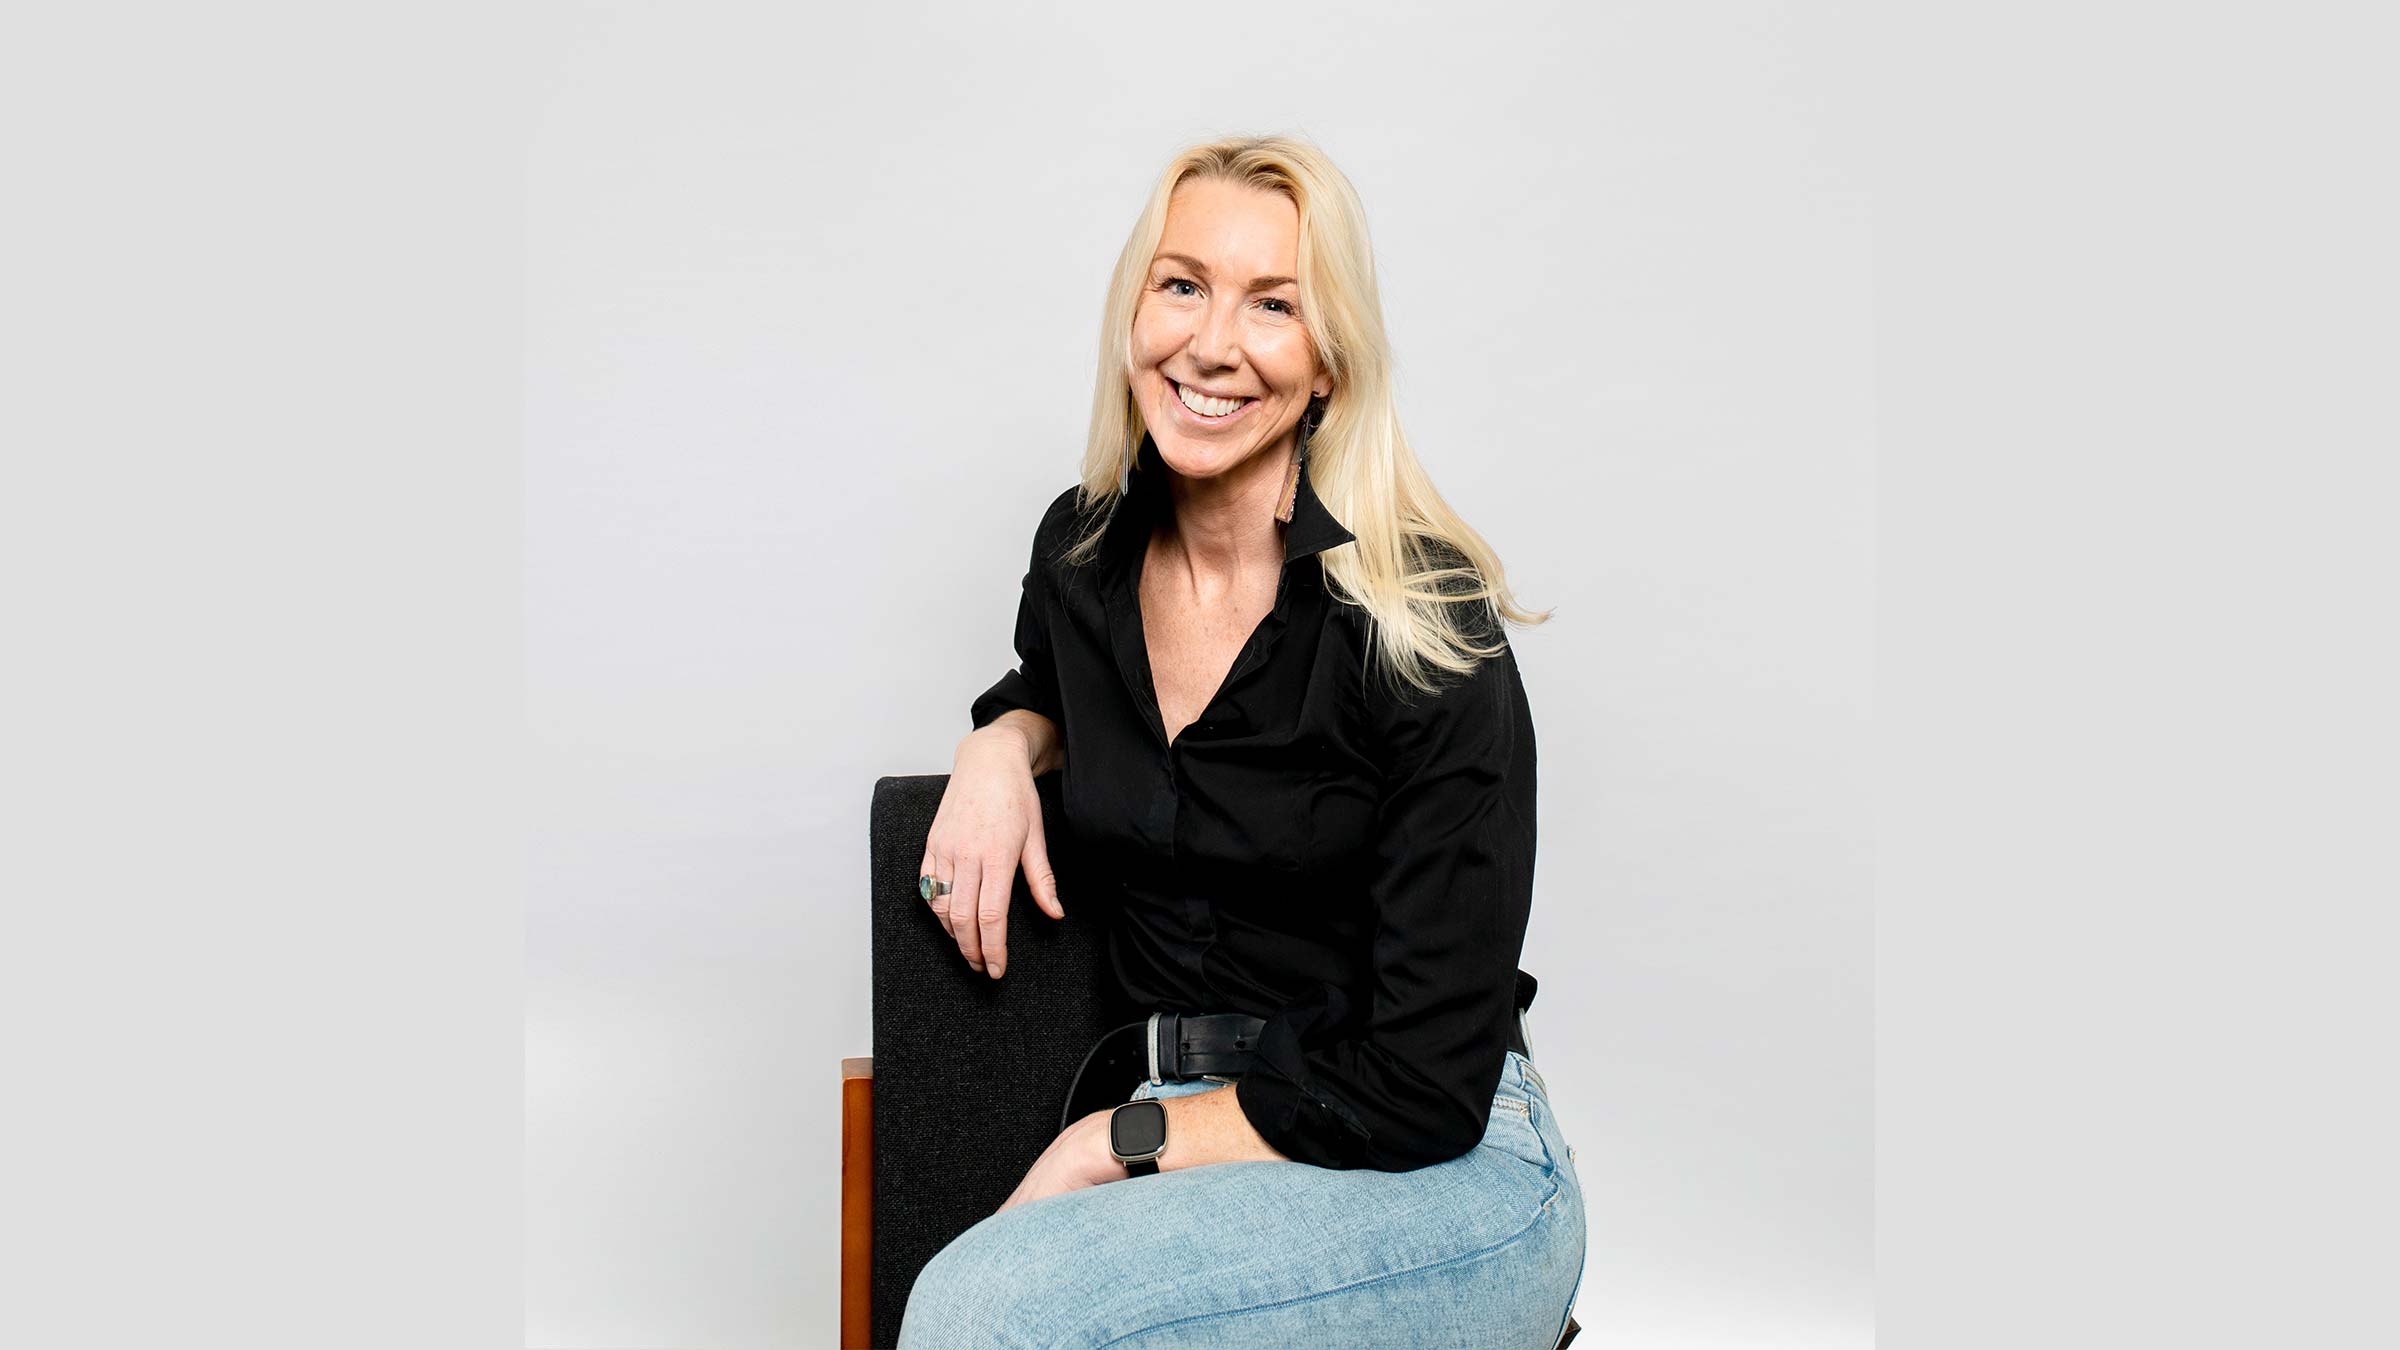 “The key to solving disability inequality is business”: in conversation with Caroline Casey, founder at The Valuable 500